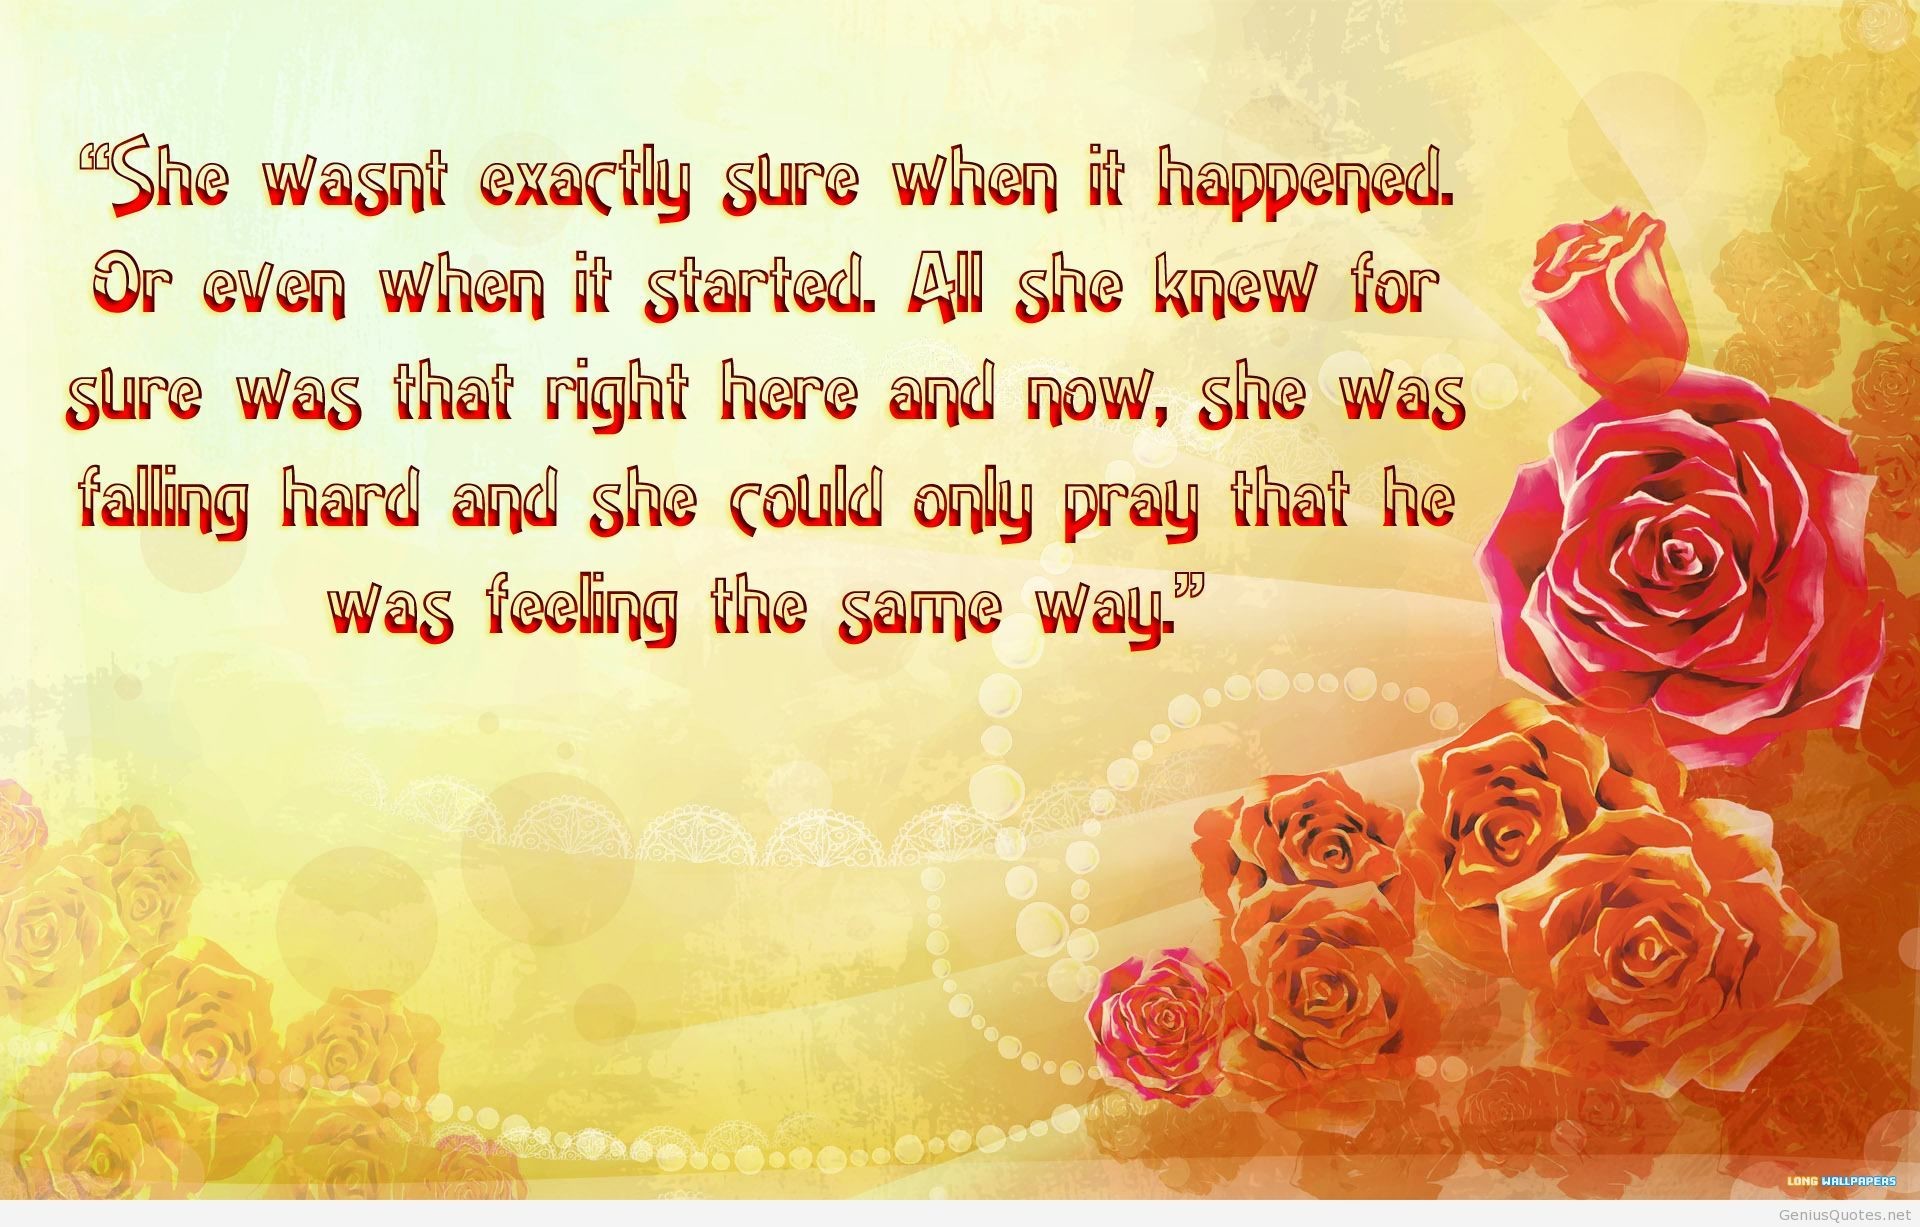 1920x1227 Cute Love Quote Wallpaper Picture For Desktop Wallpaper 1920 x 1227 px  707.88 KB for mobile